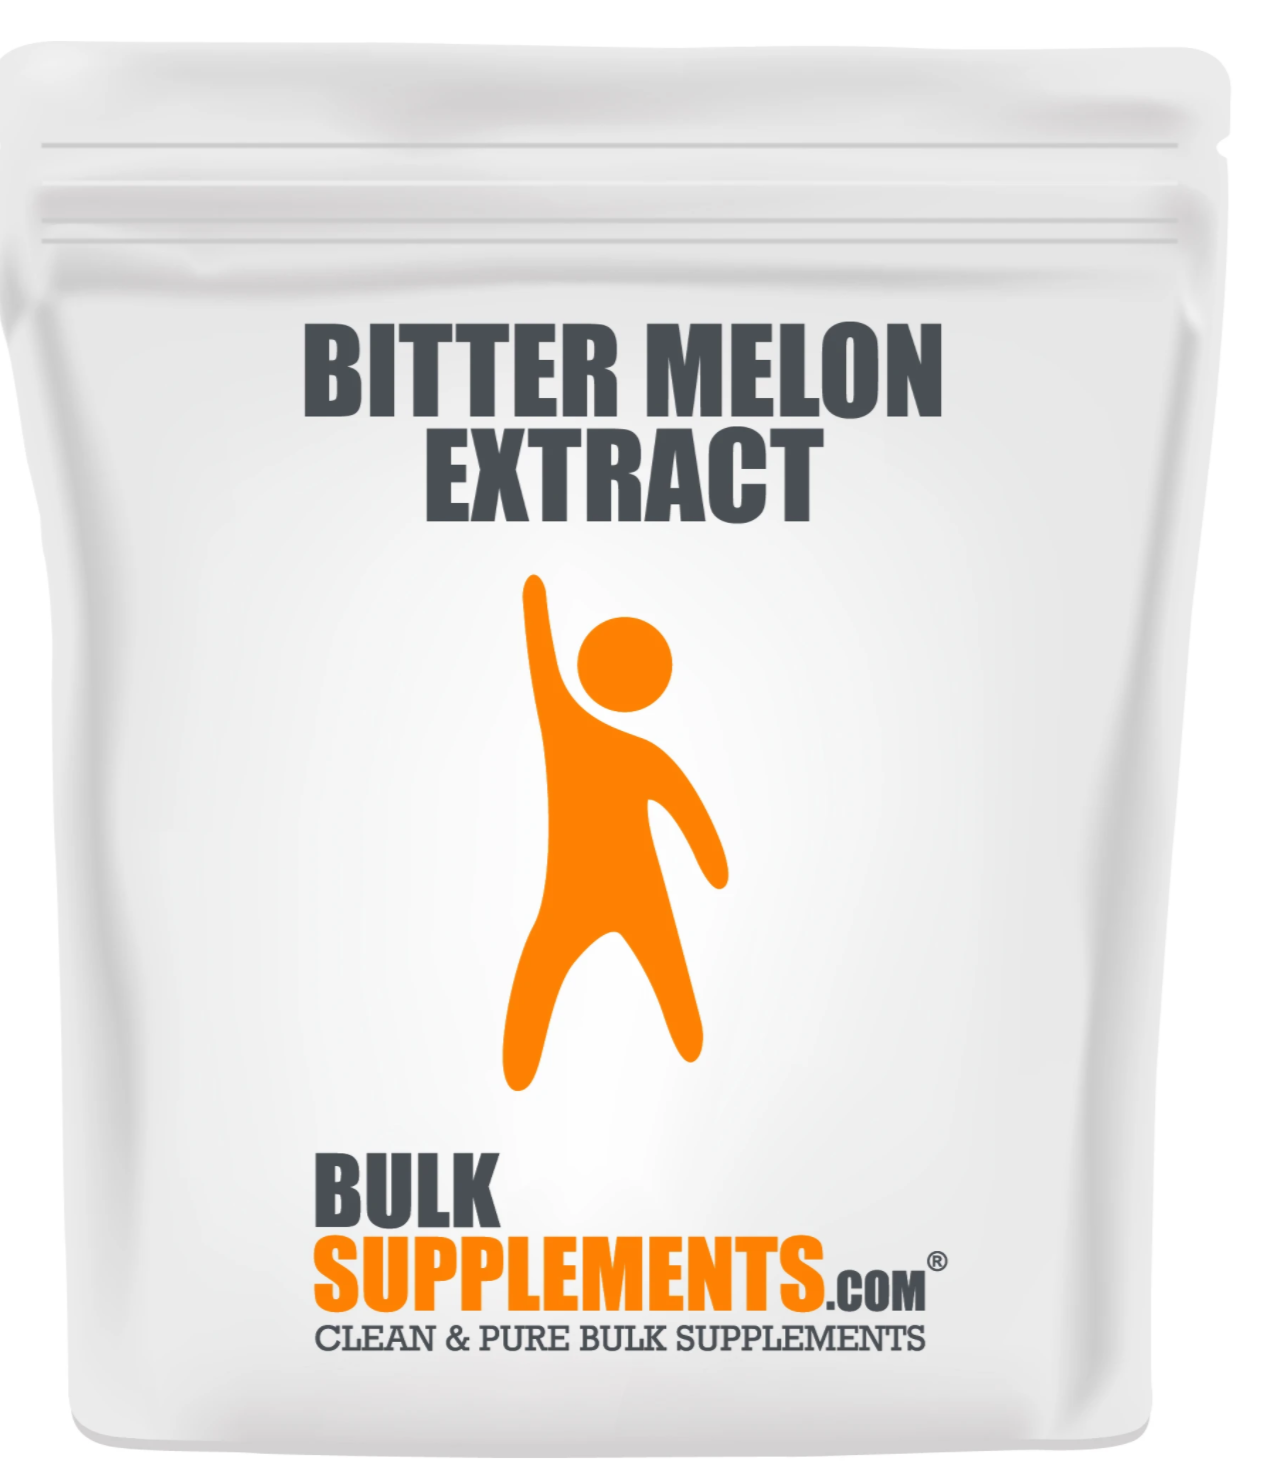 bitter melon extract